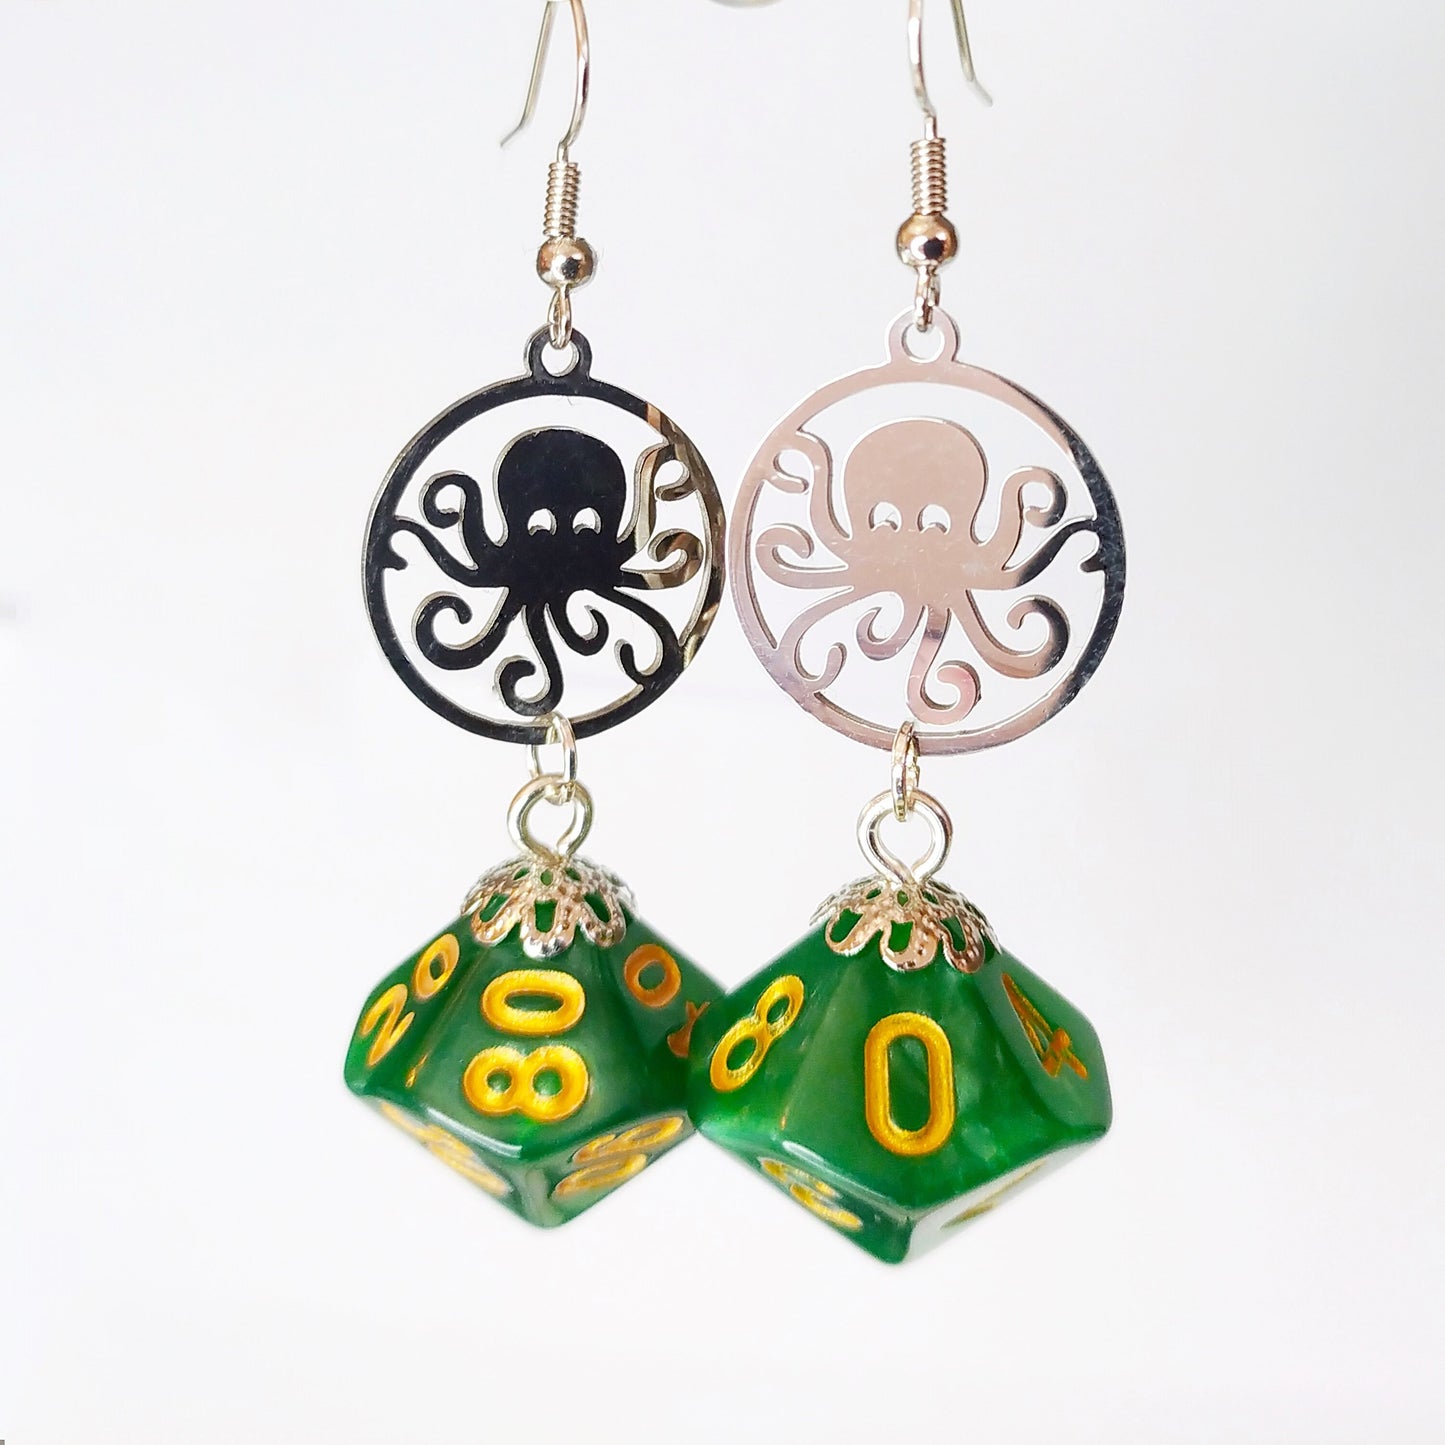 Call of Cthulhu D10/% Earrings, Silver Finishing